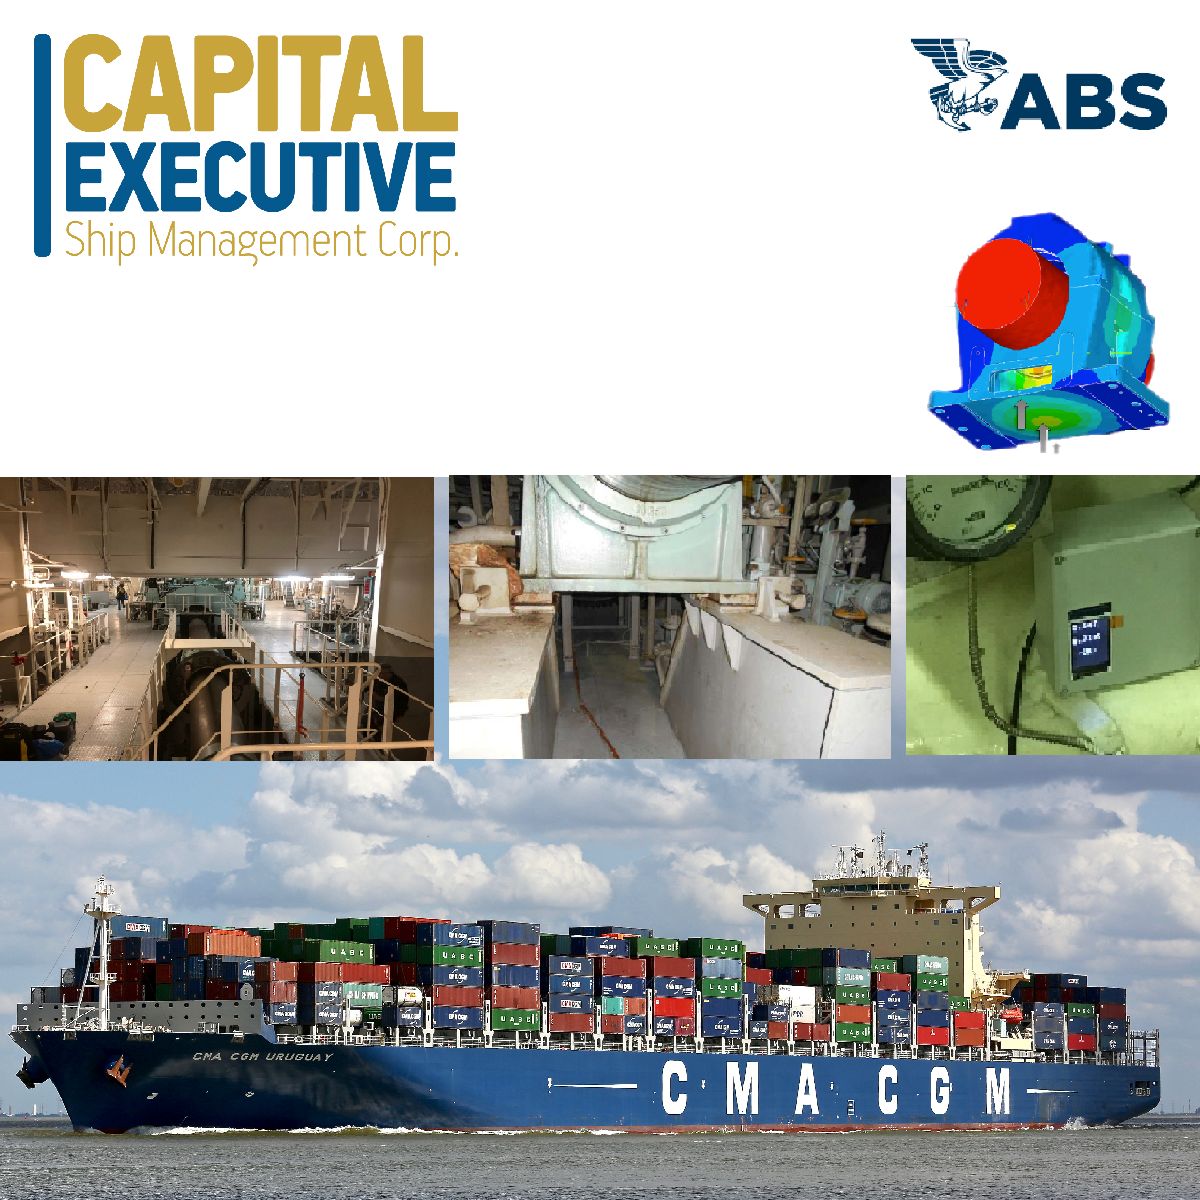 Capital Executive – Participation in the innovative Smart Bearing program in collaboration with ABS, NTUA and Metrisis Ltd.